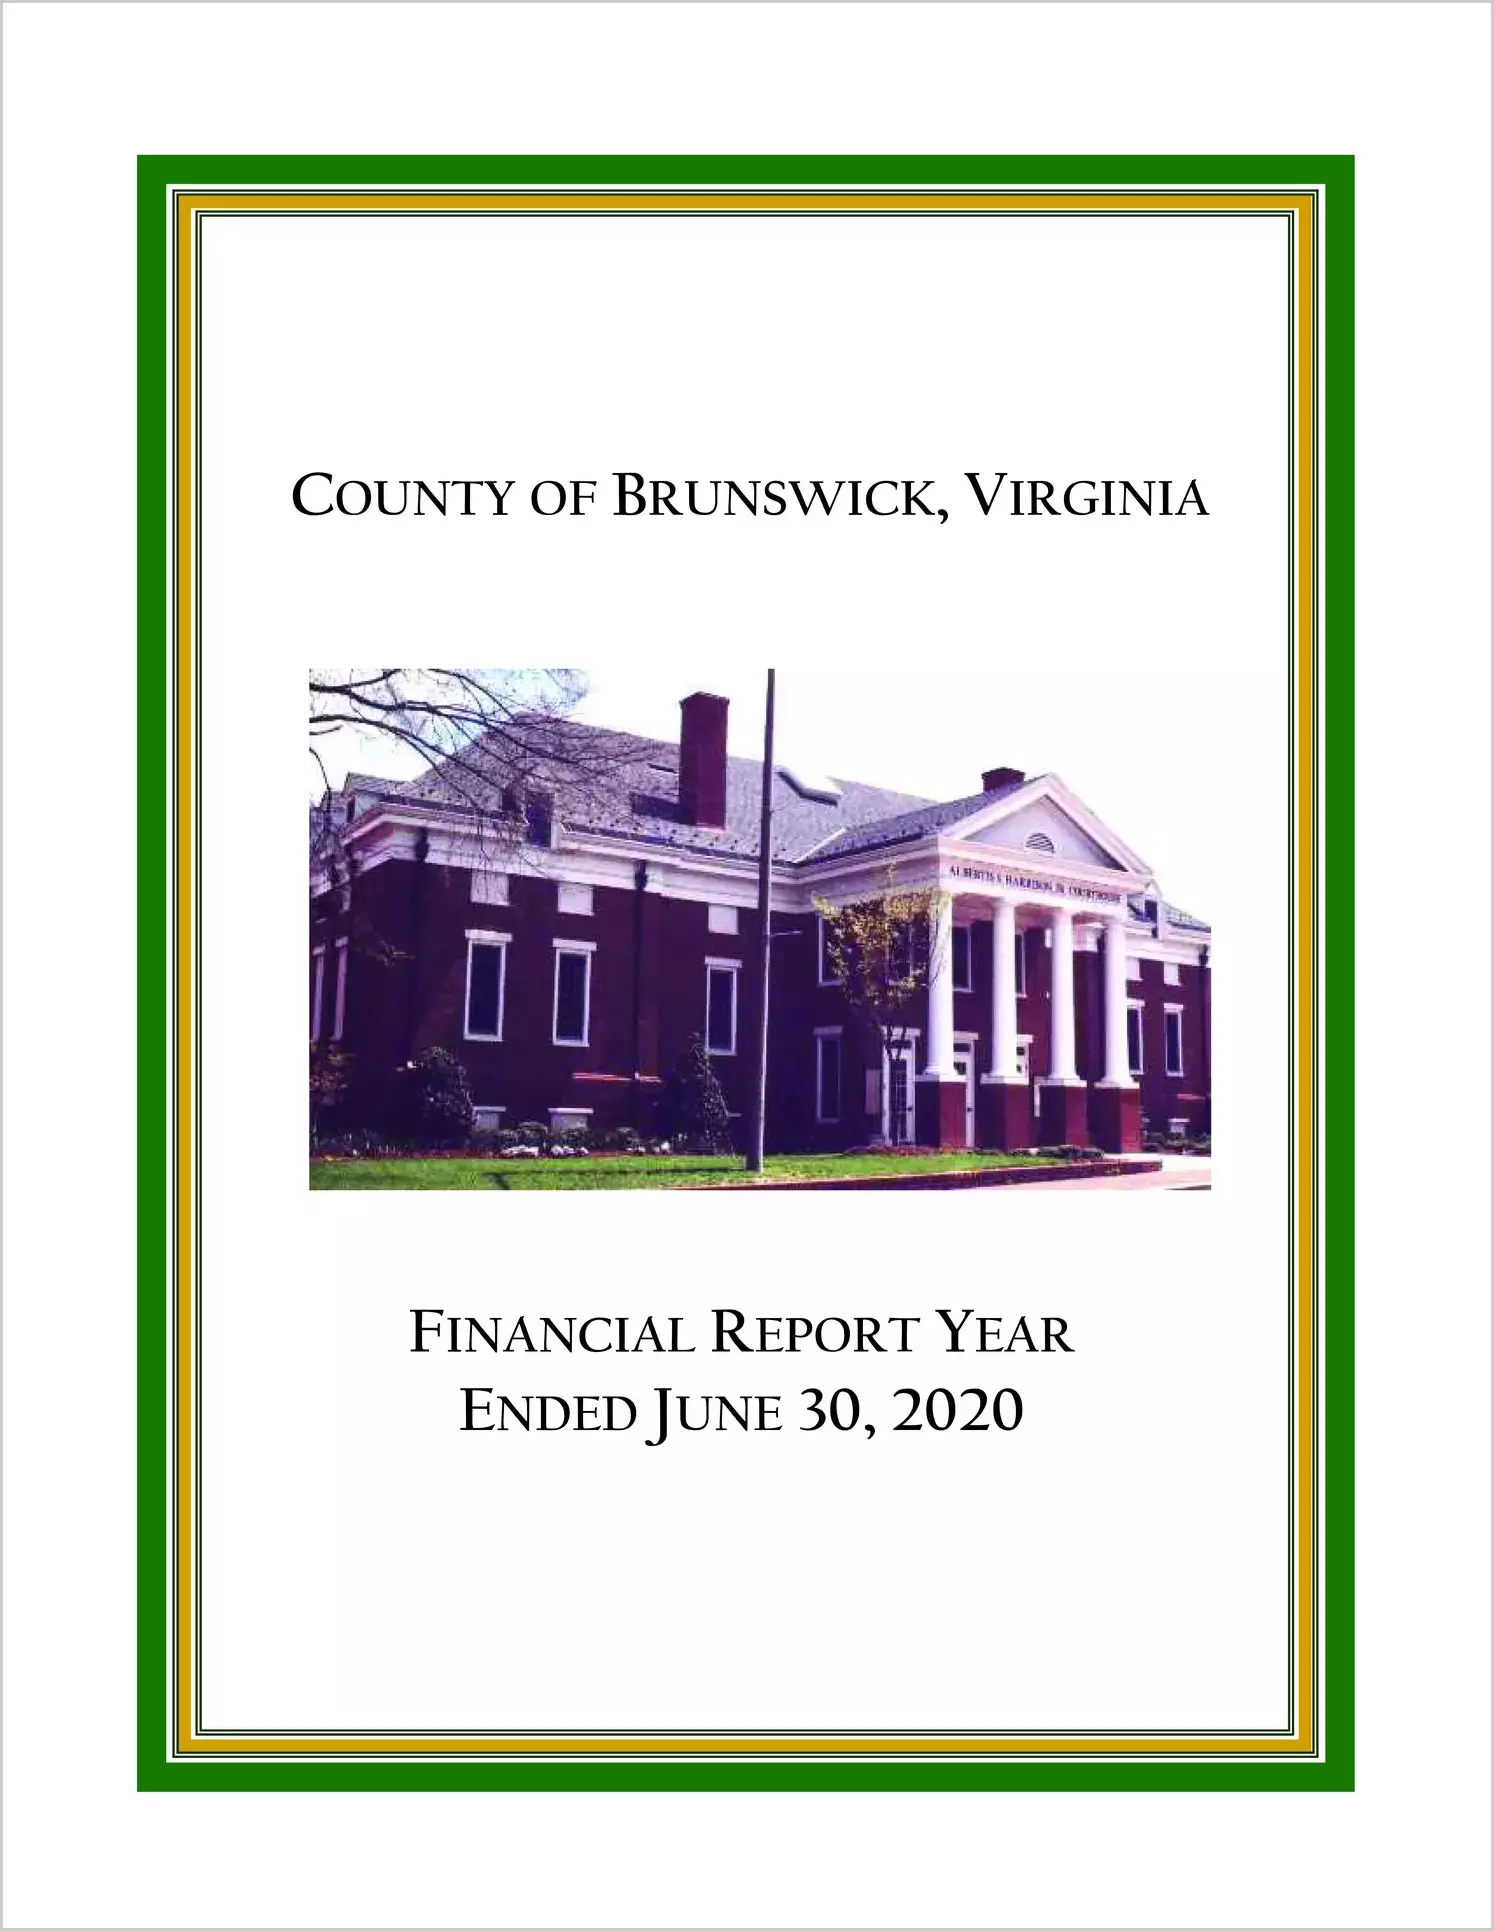 2020 Annual Financial Report for County of Brunswick